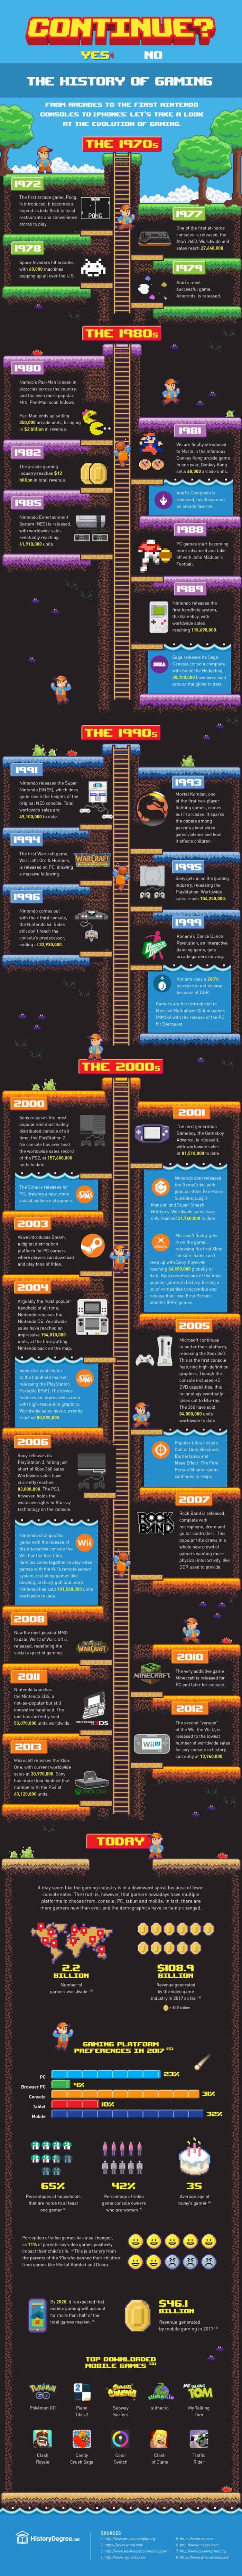 The History of Video Games Inforgraphic